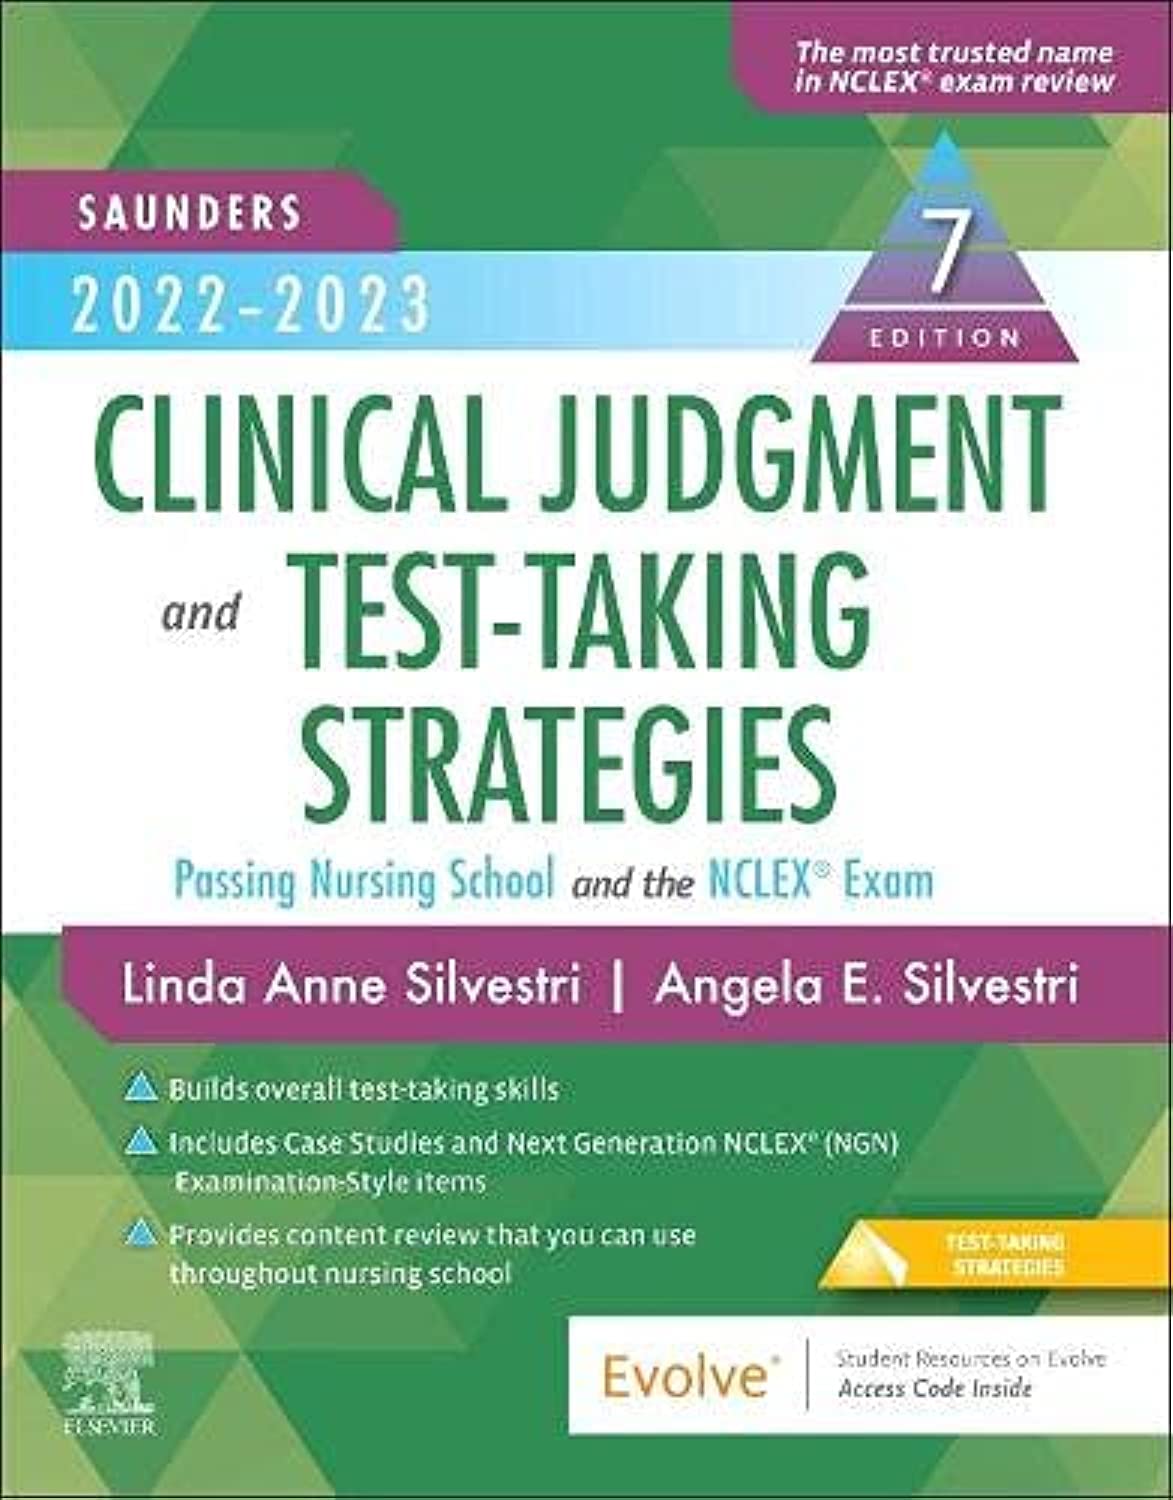 Saunders 2022-2023 Clinical Judgment and Test-Taking Strategies, 7th Edition by Linda Anne Silvestri PhD RN Faan 